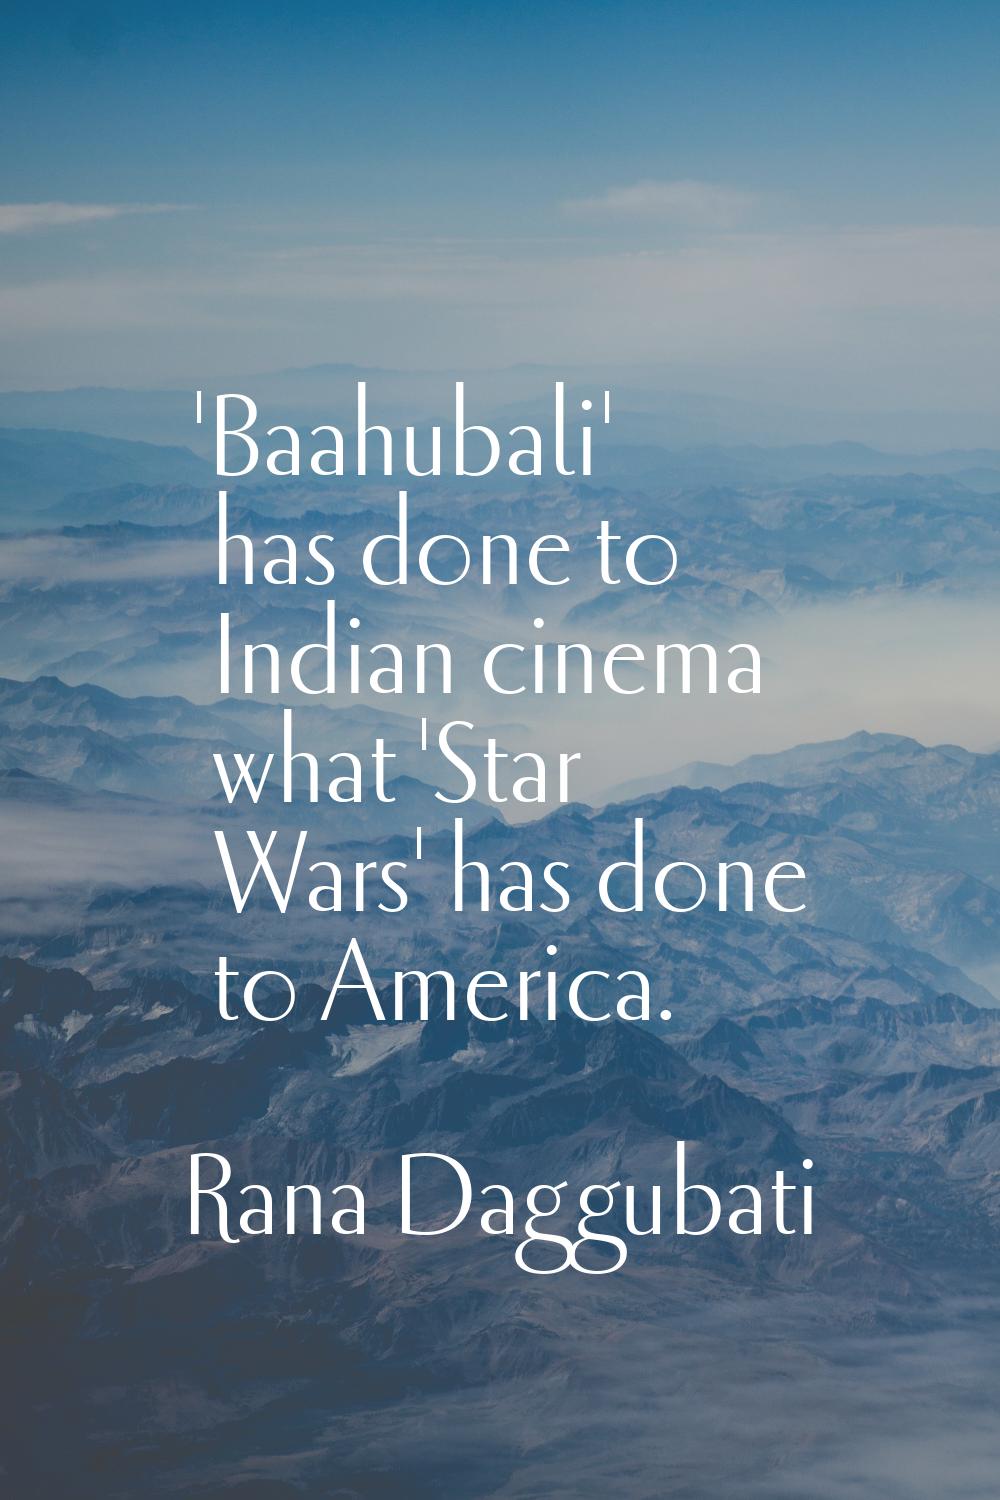 'Baahubali' has done to Indian cinema what 'Star Wars' has done to America.